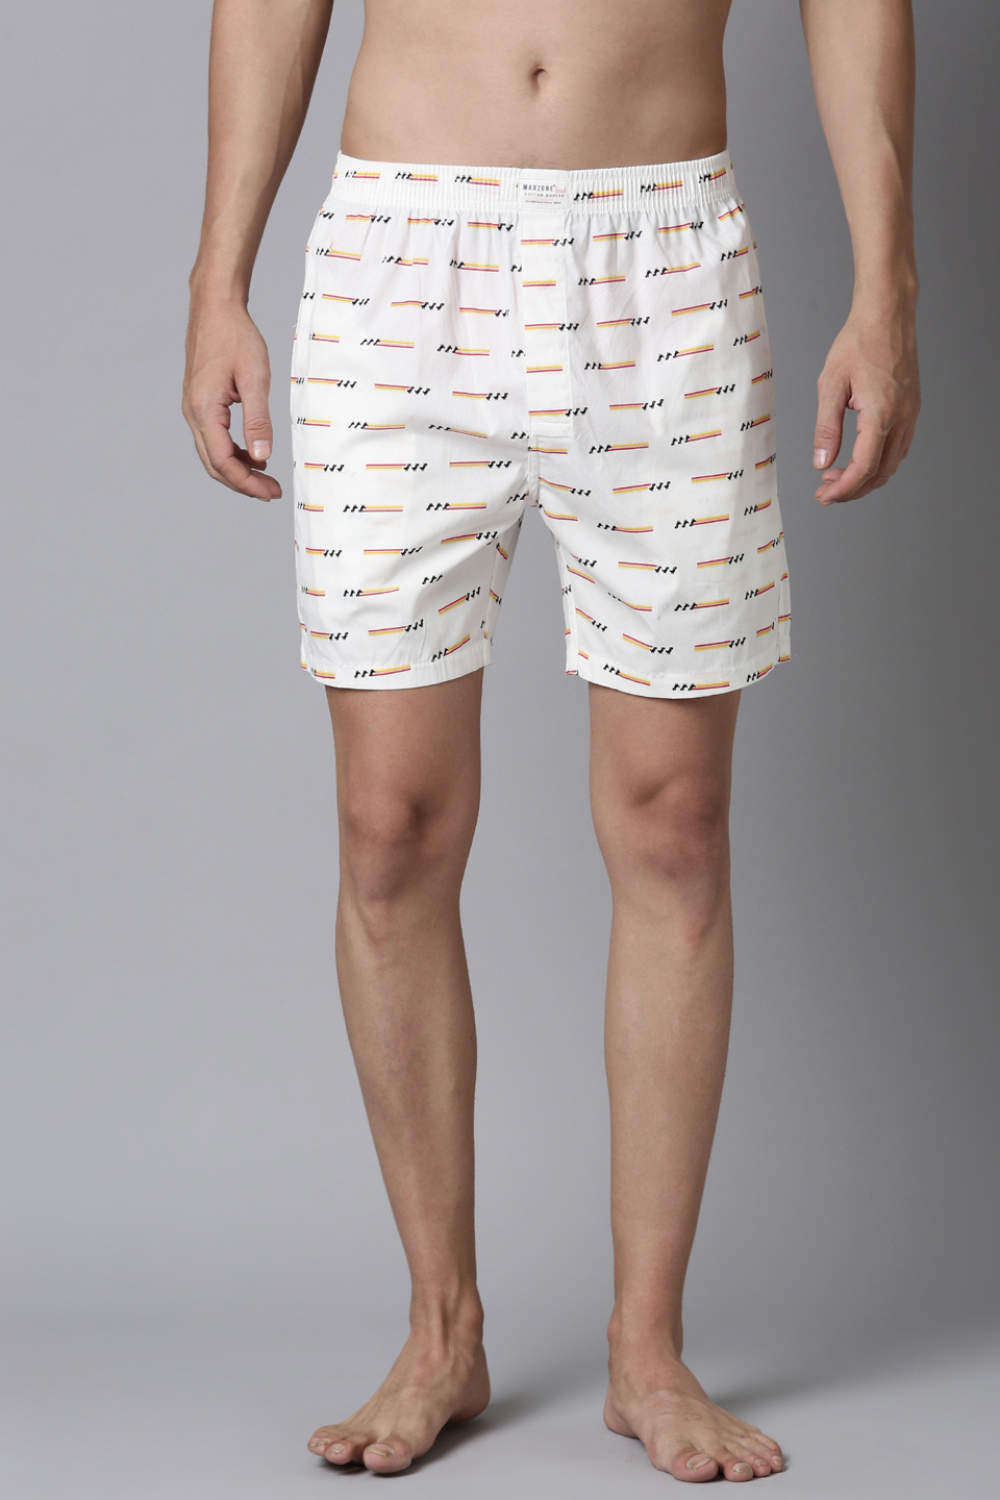 Pastel-Yellow Printed & White Printed 365 Boxers Combo  Maxzone Clothing   